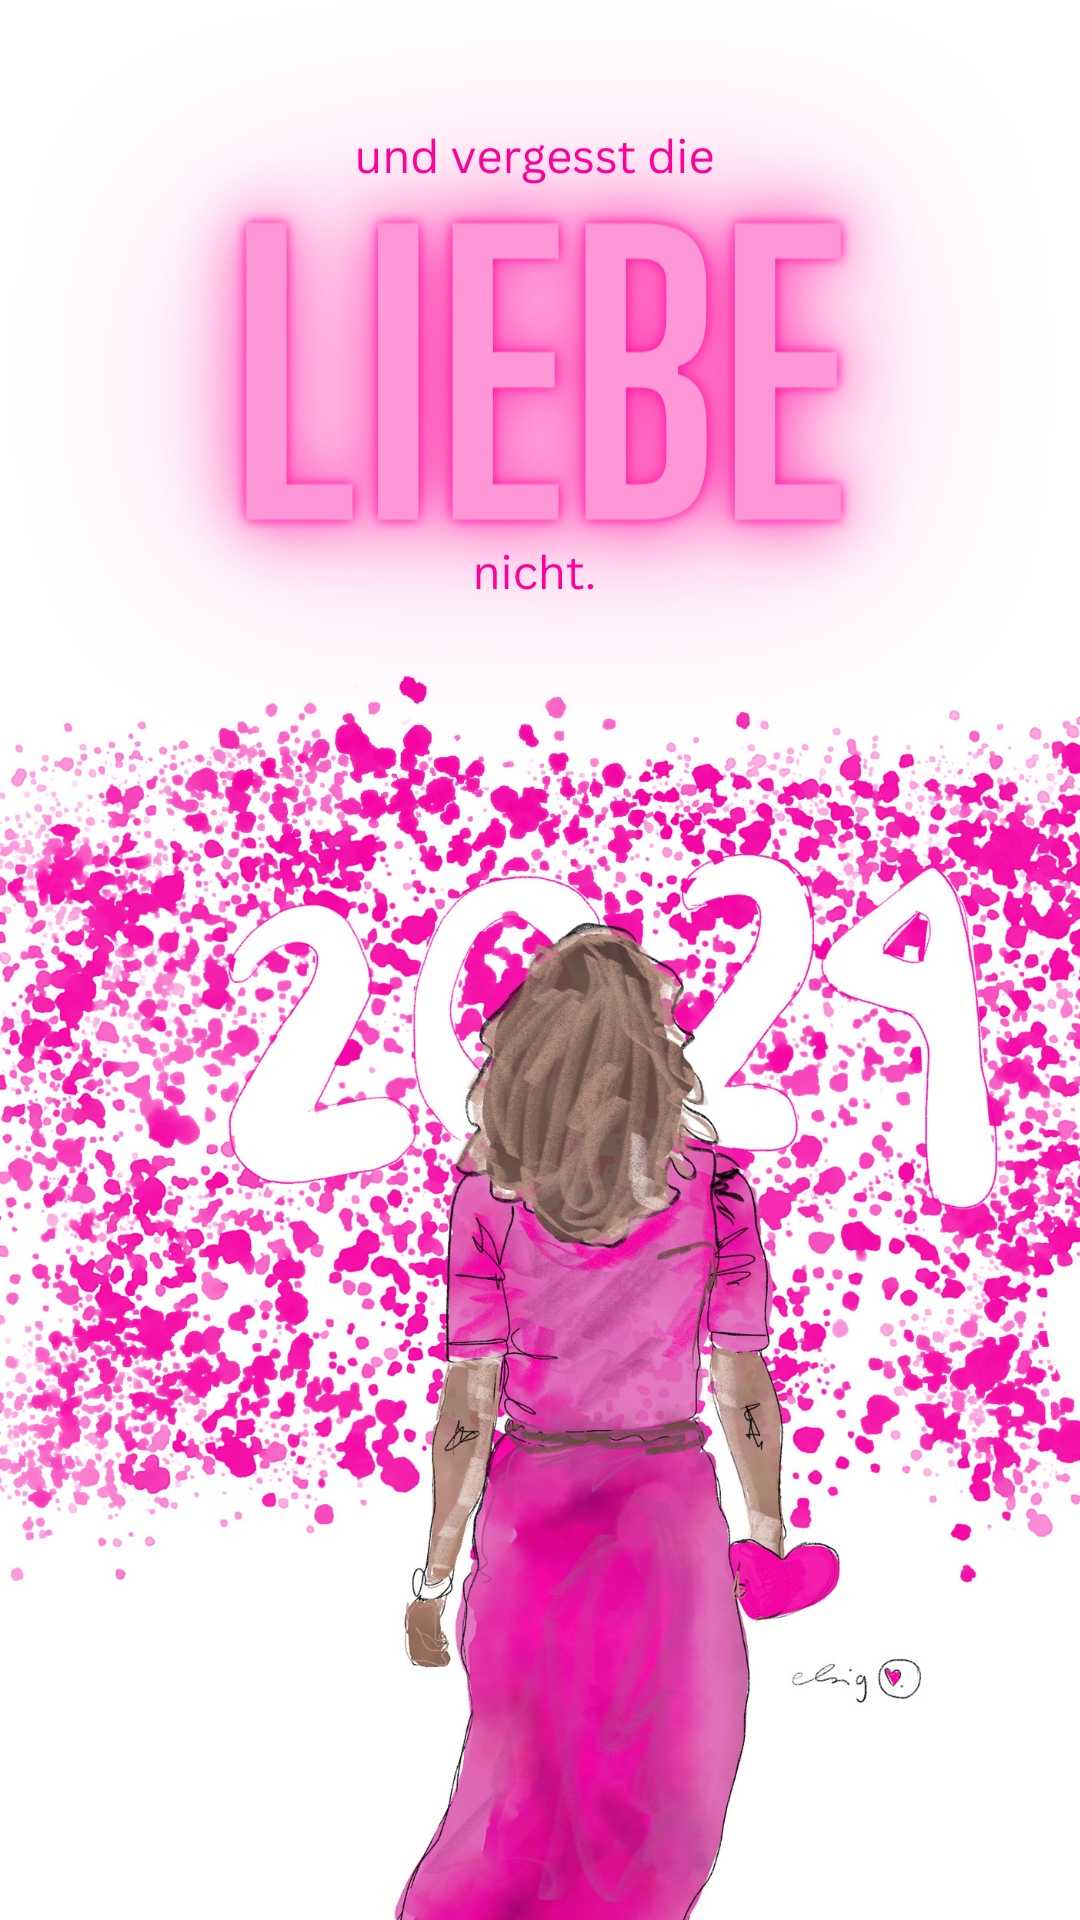 Liebe by Sandra Elsig